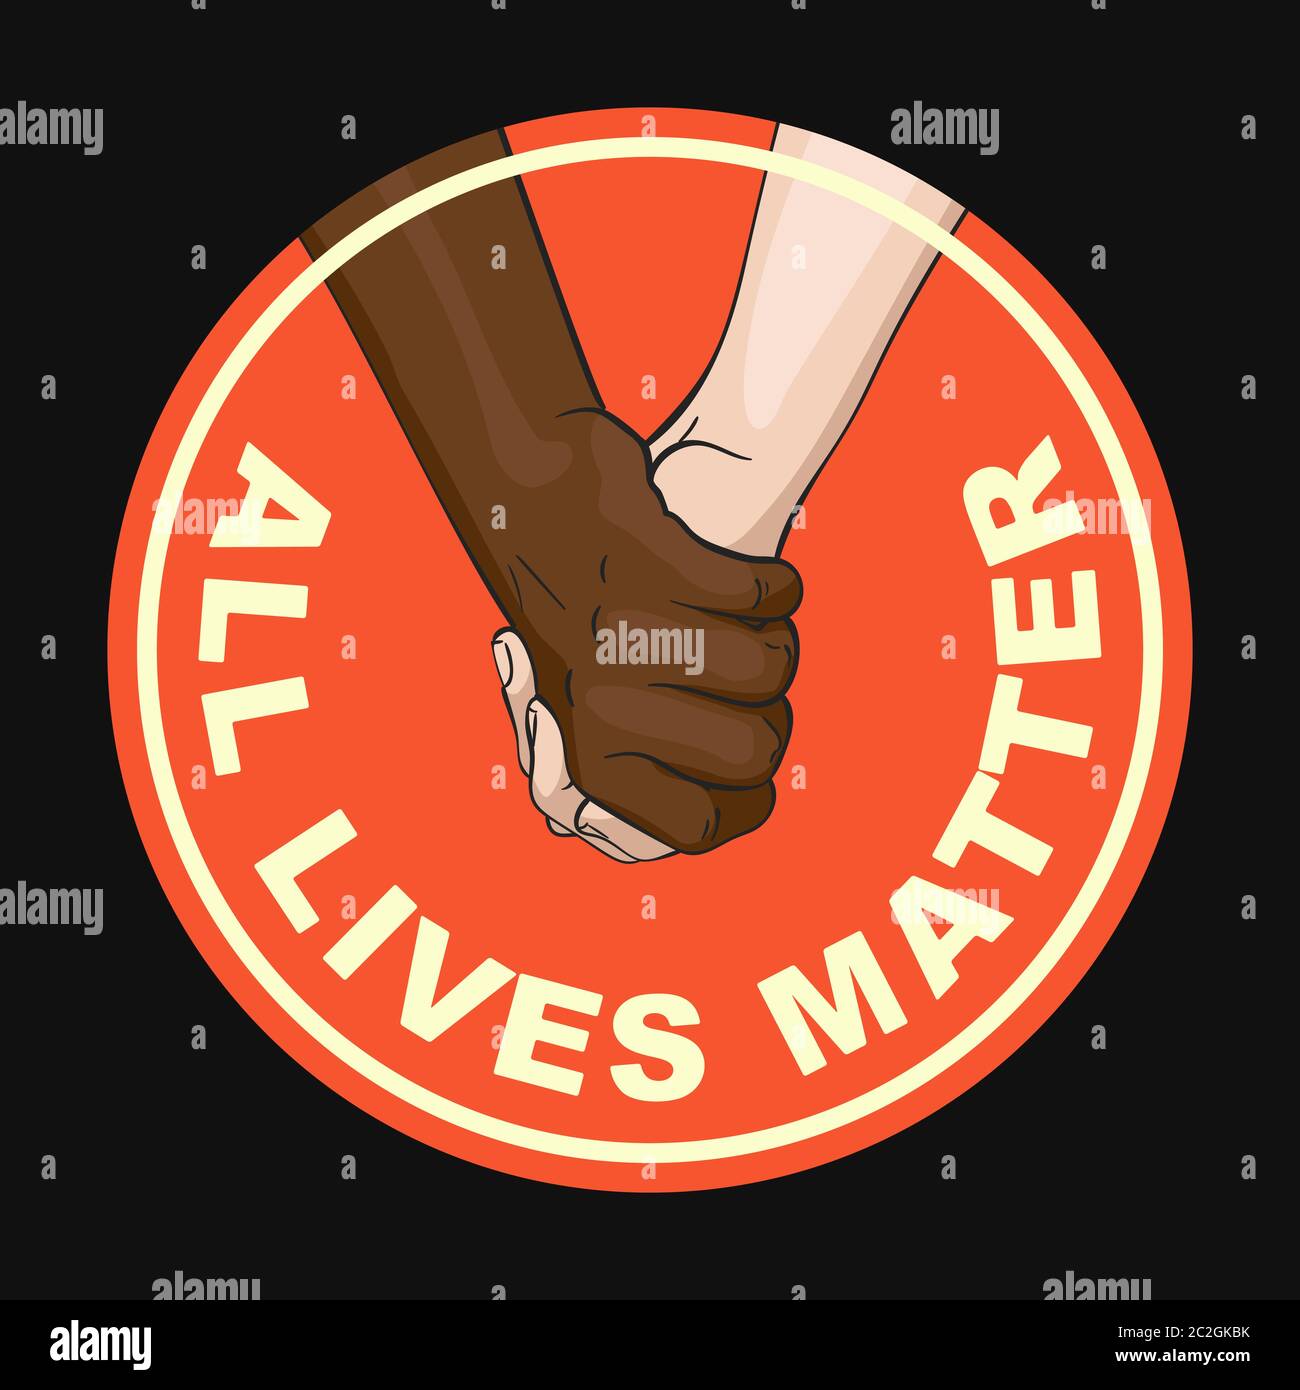 All Lives Matter round sign with multiracial couple holding hands, Friendship concept between multiethnic people. Vector illustration can be used as s Stock Vector